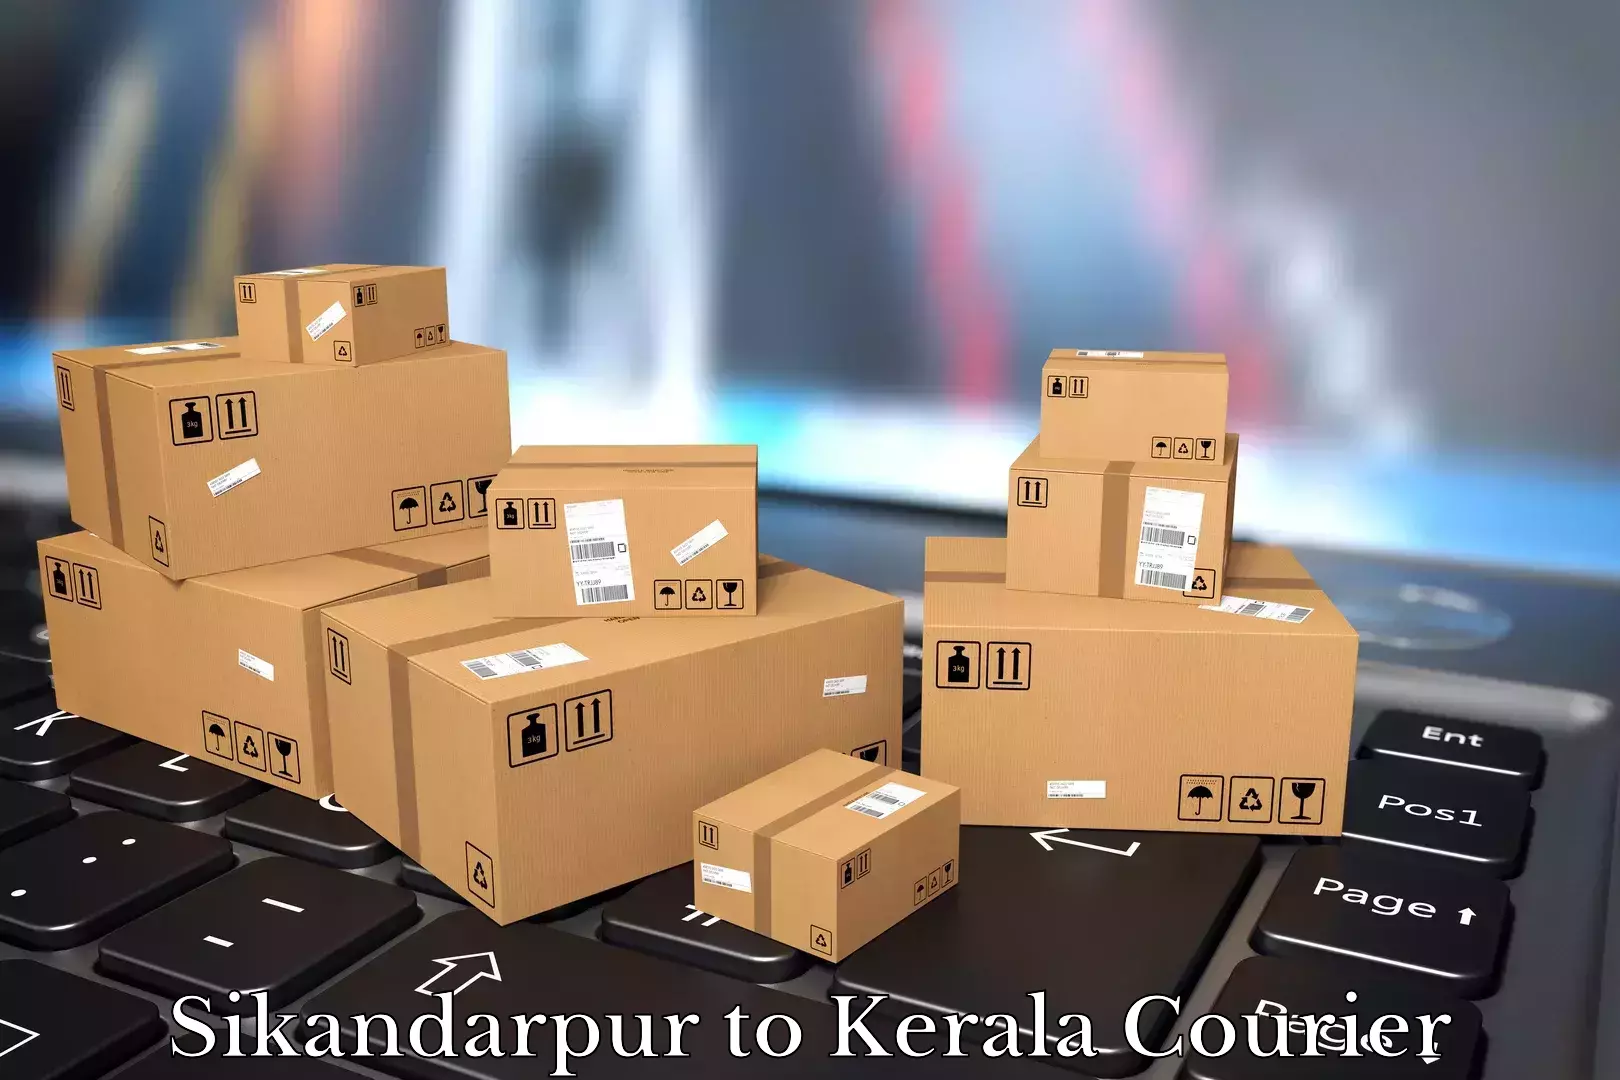 Furniture moving specialists Sikandarpur to Kerala